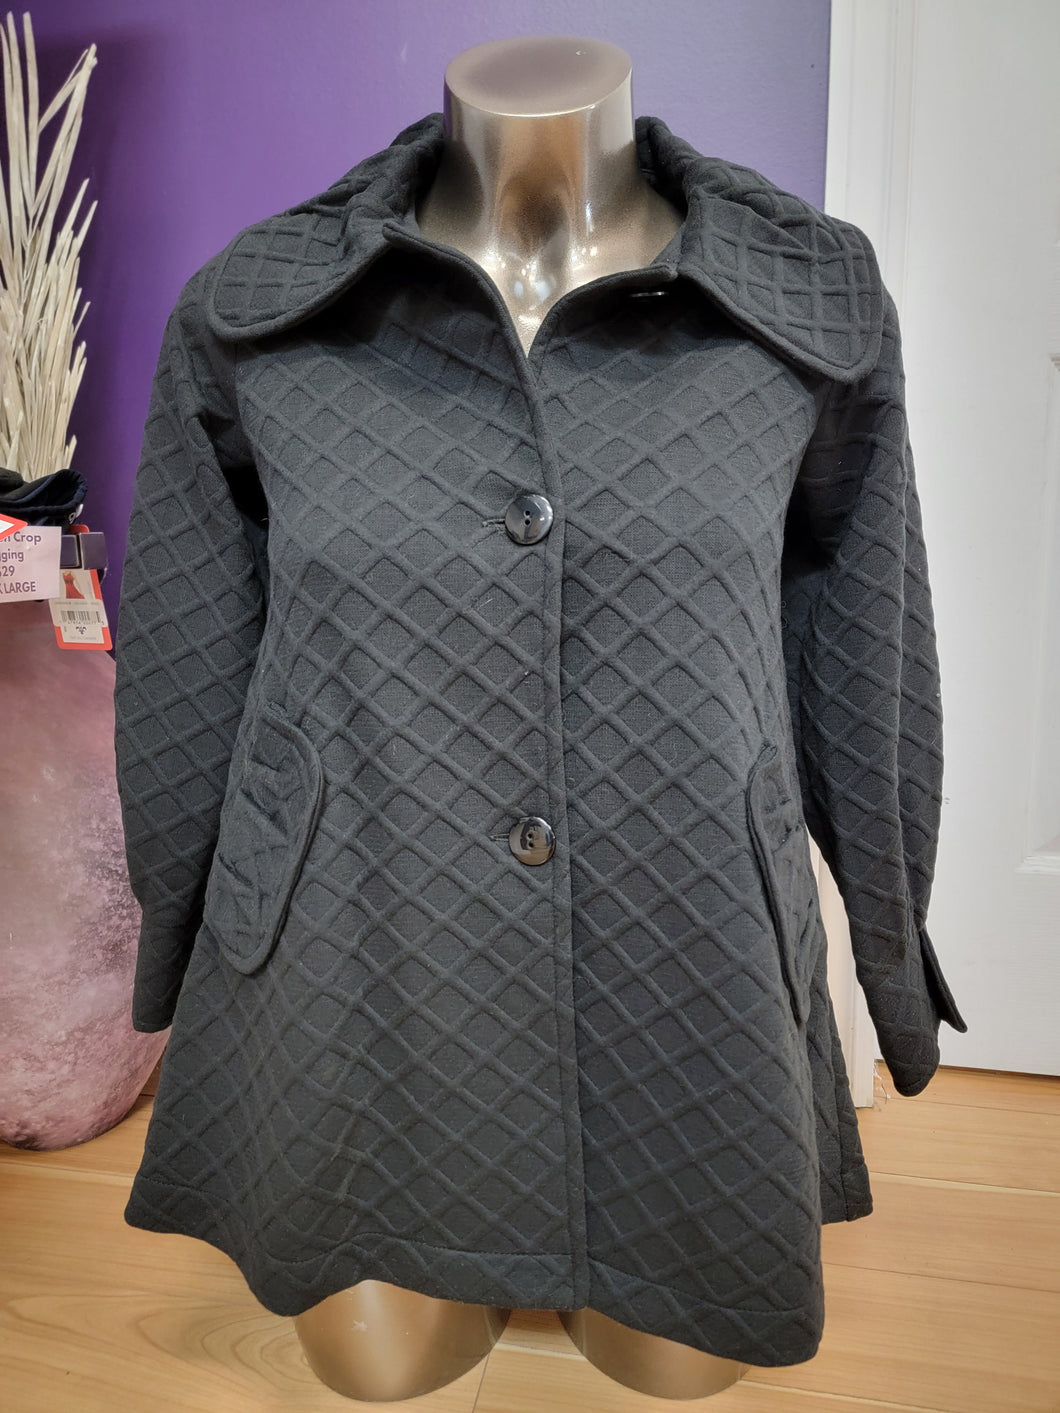 Long Sleeve Knit Jacket by Pretty Woman (available in plus sizes)